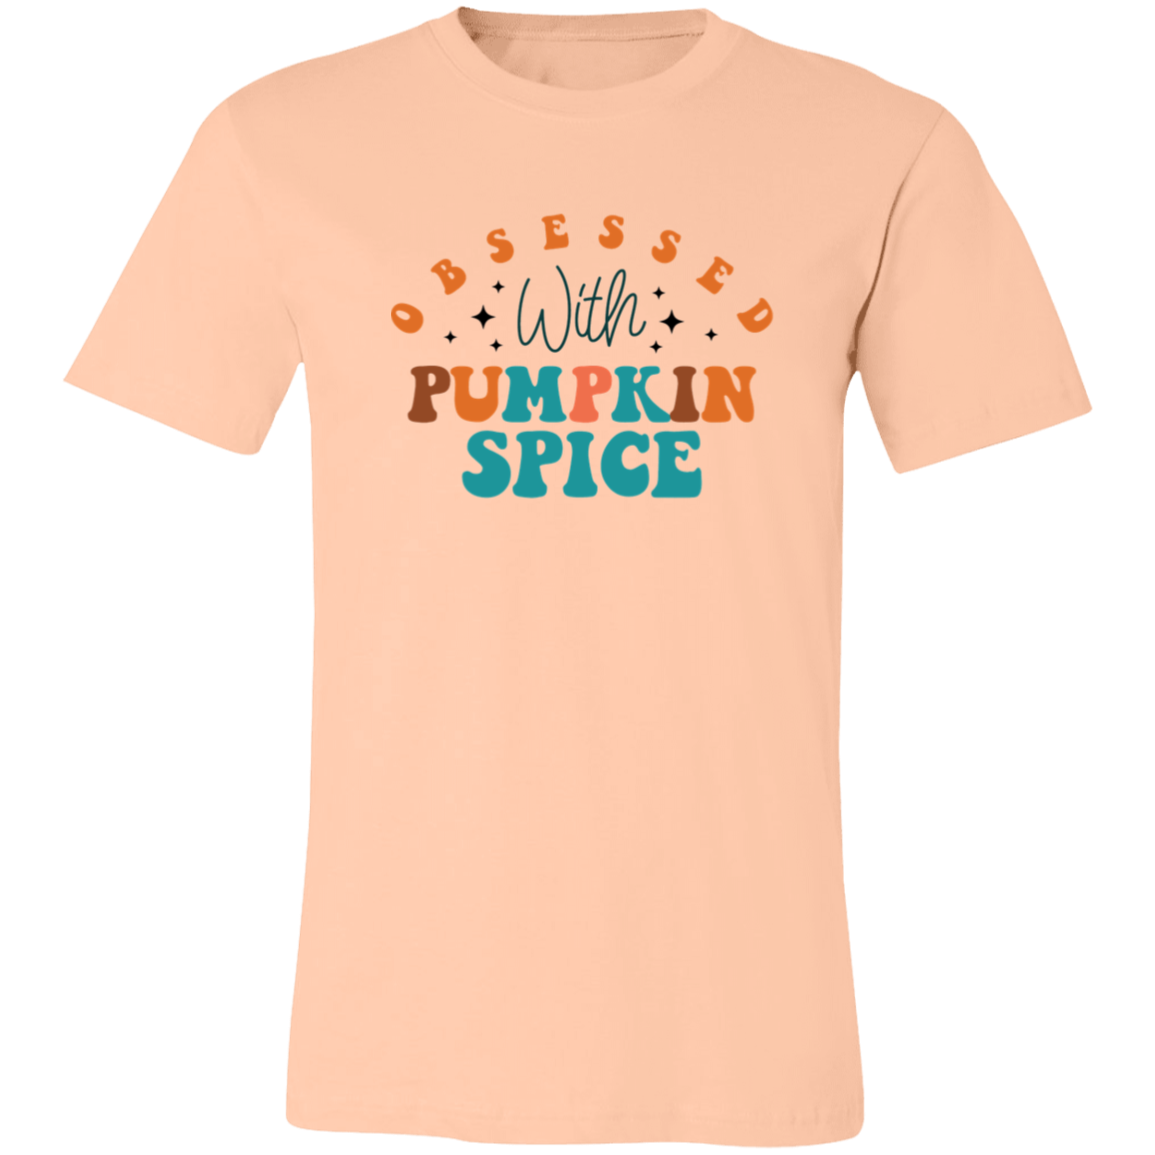 Obsessed with Pumpkin Spice Shirt